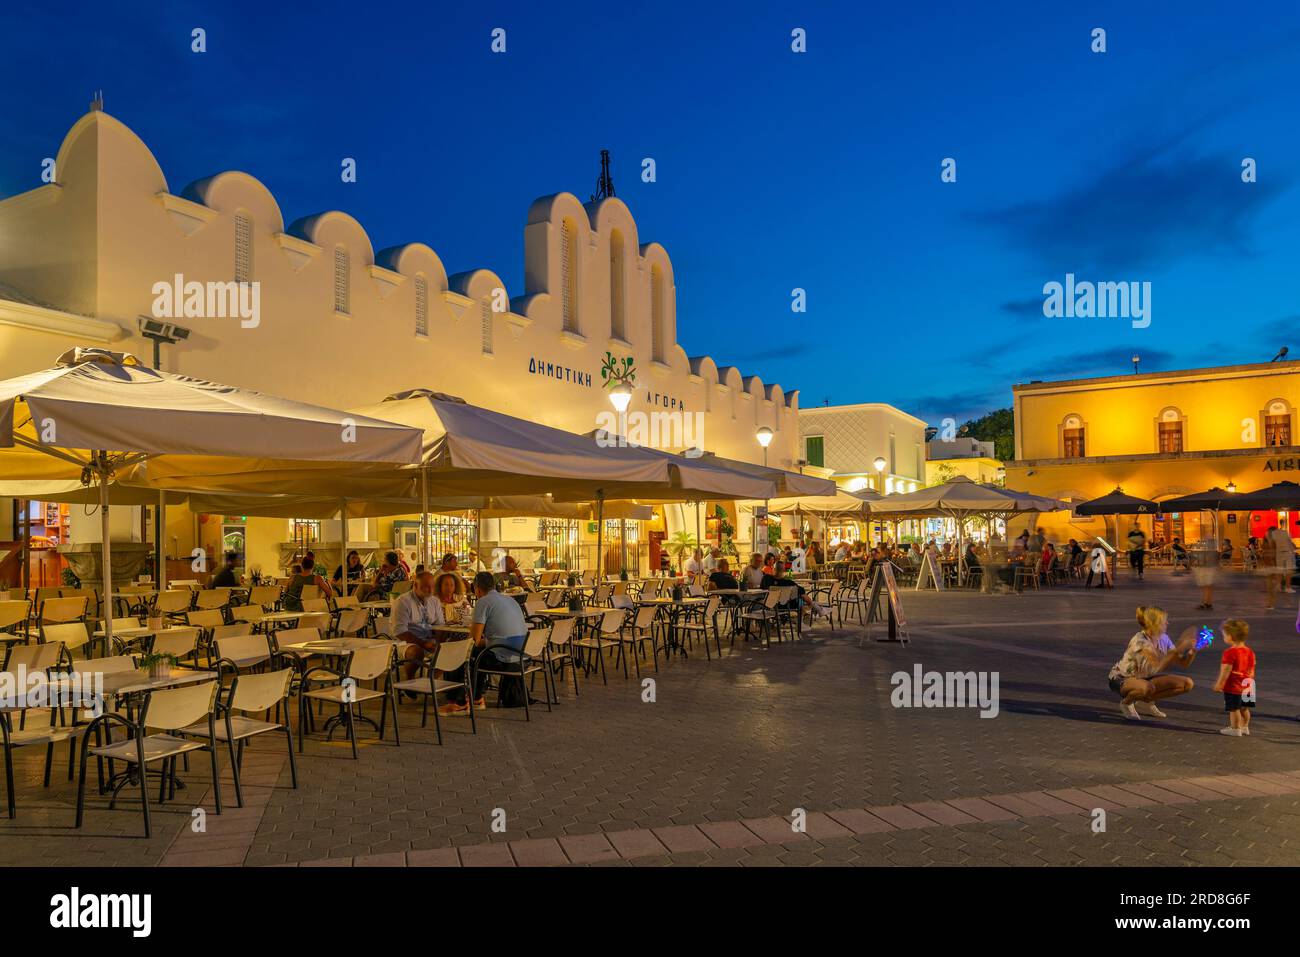 View of Kos Municipal Market in Eleftherias Central Square in Kos Town at dusk, Kos, Dodecanese, Greek Islands, Greece, Europe Stock Photo